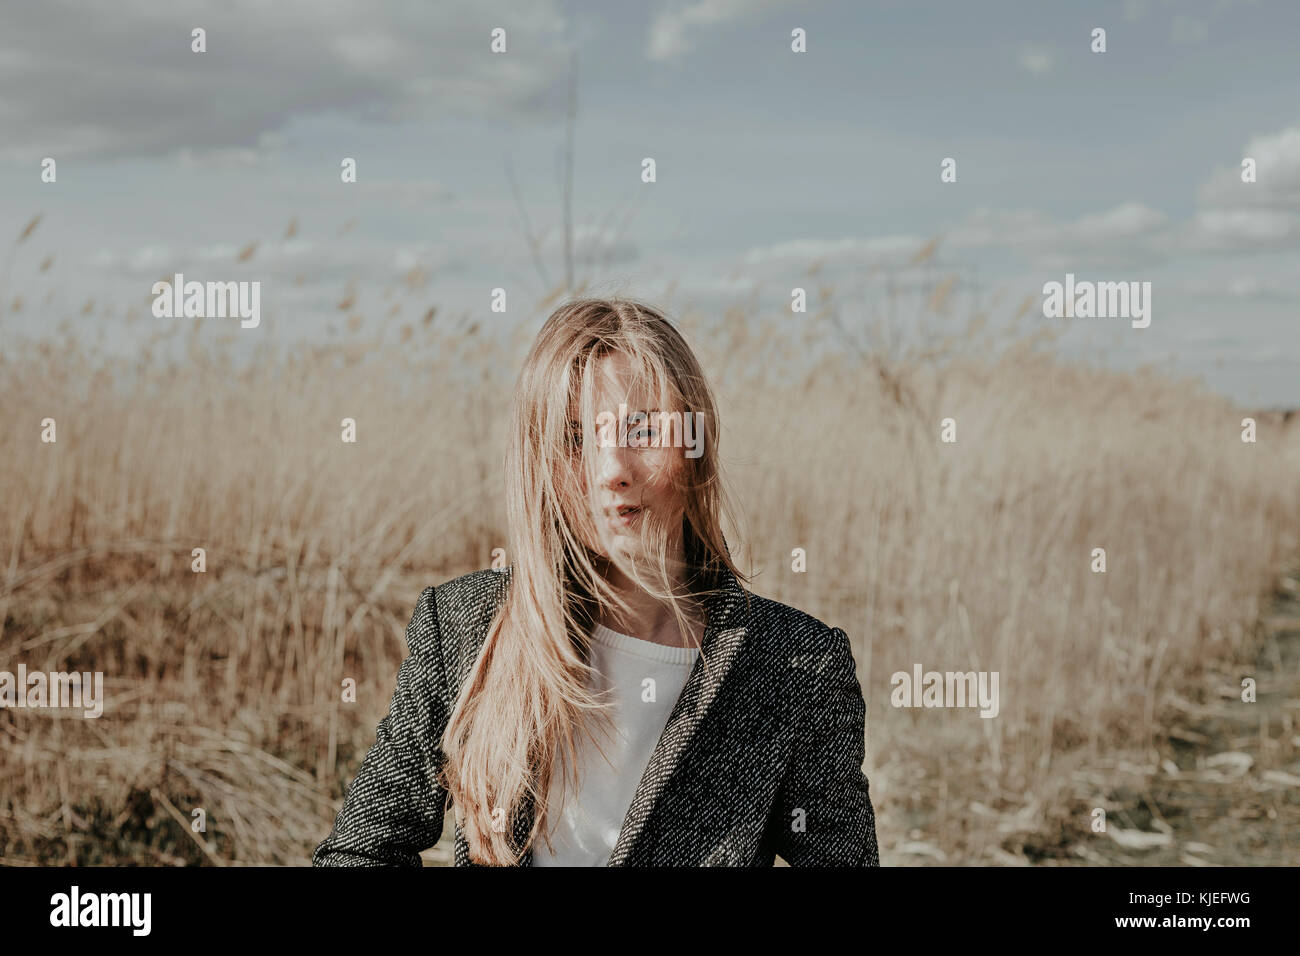 Pretty and young european woman with face covered  by her blonde hair looking at camera. Girl posing outdoor on bulrush background. Close shot. Stock Photo